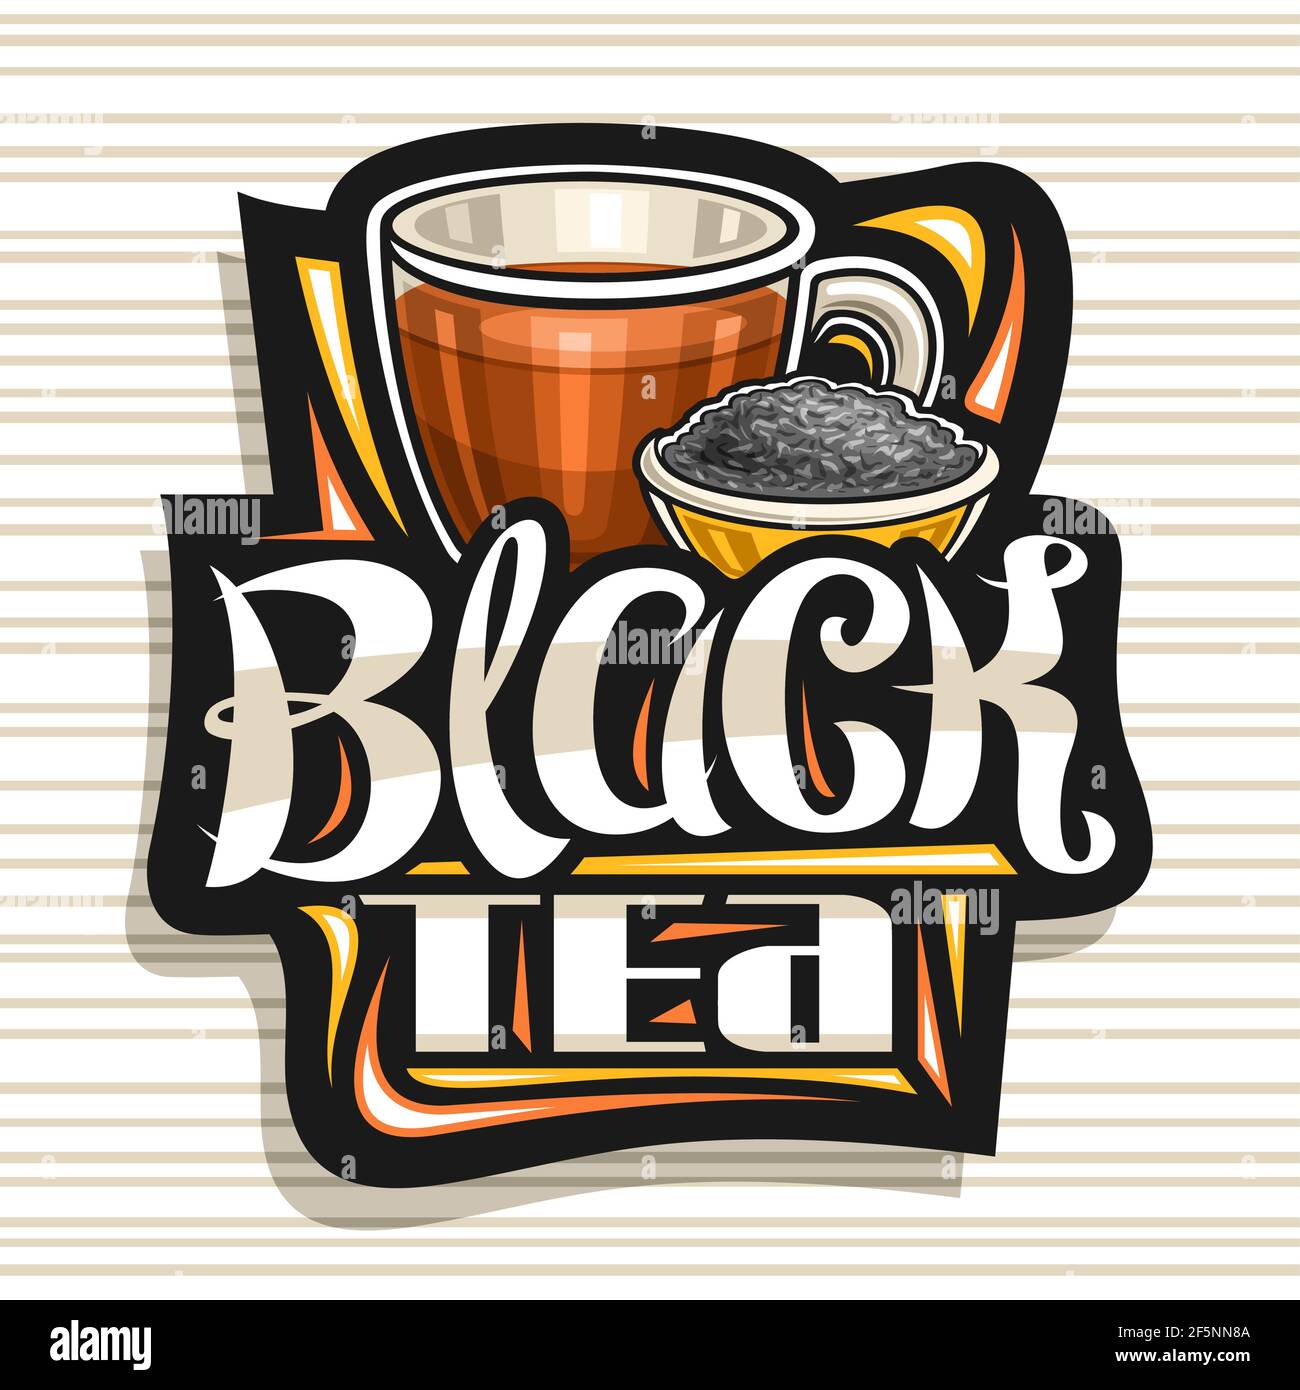 Vector logo for Black Tea, decorative label with illustration of transparent teacup and small bowl with dried blended tea, art design sign with unique Stock Vector